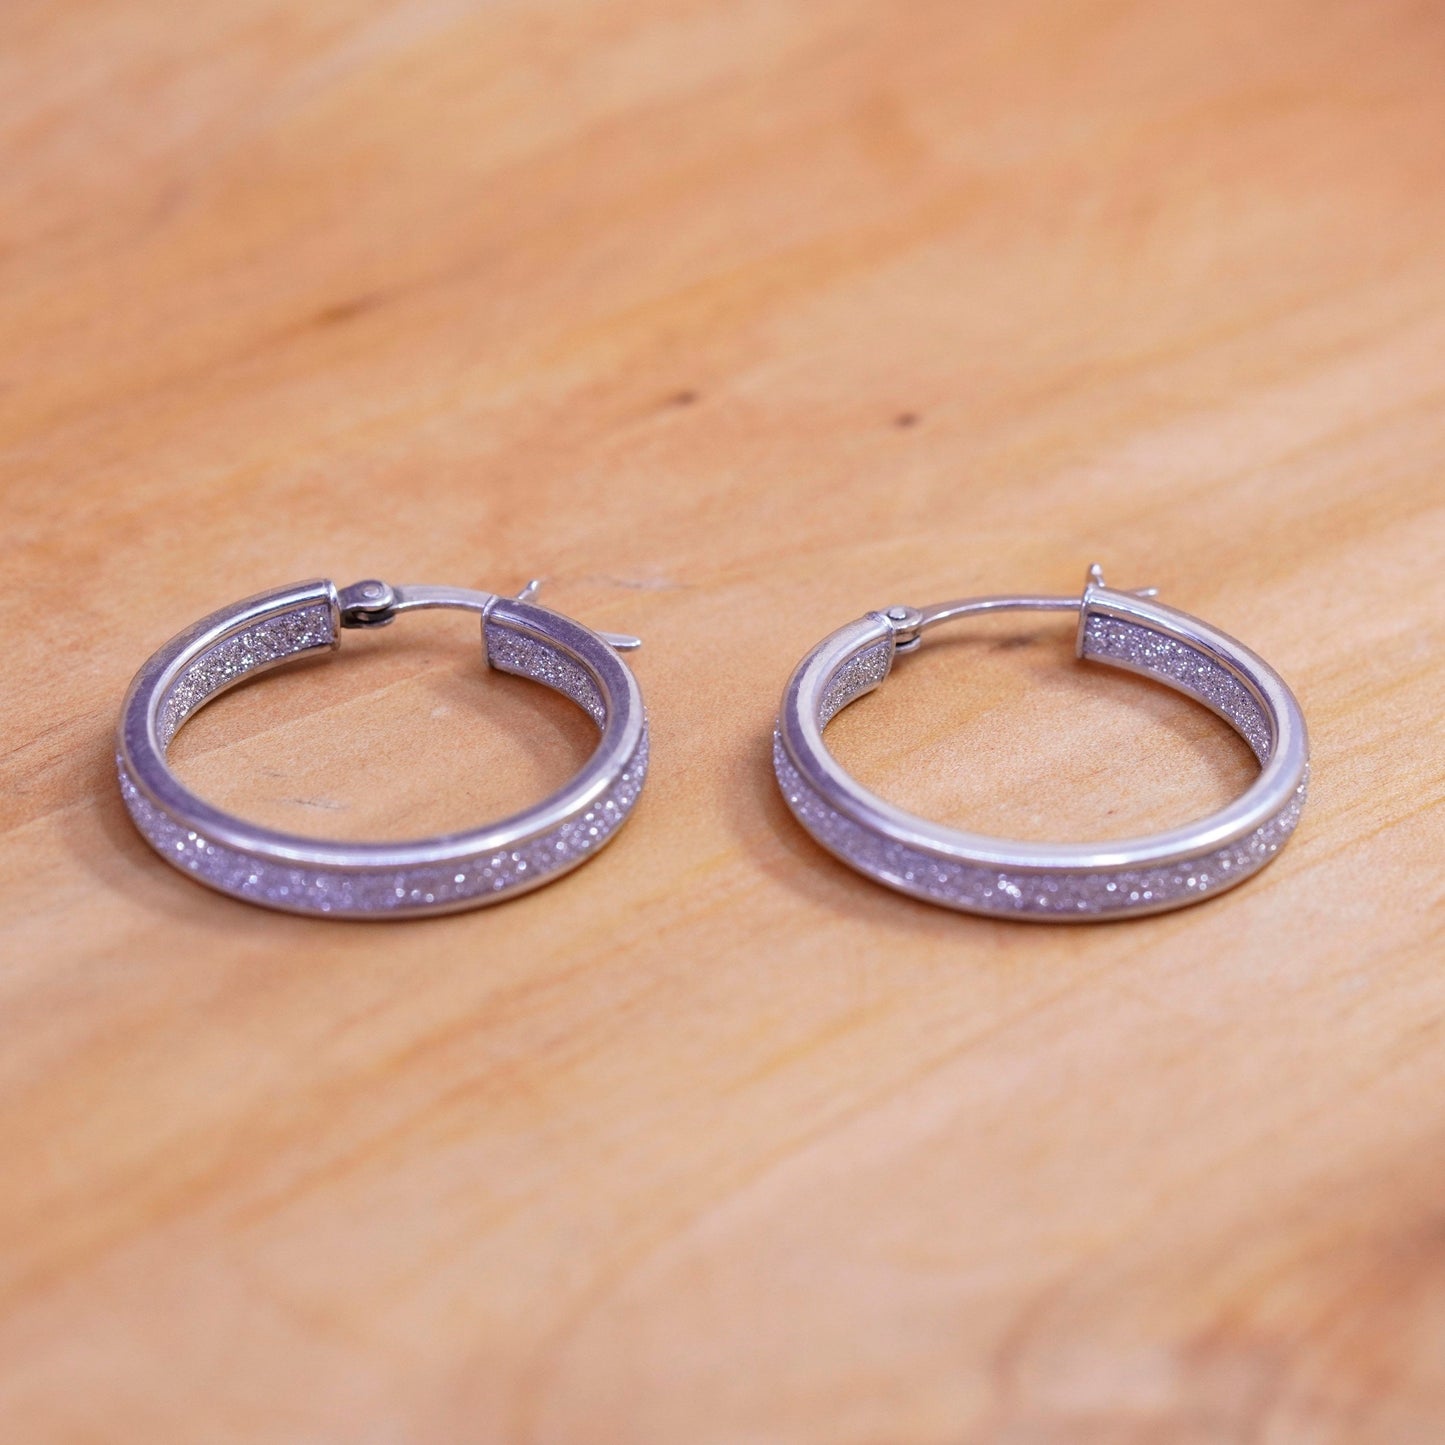 1”, vintage Sterling silver hoops, 925 earrings with glittering center